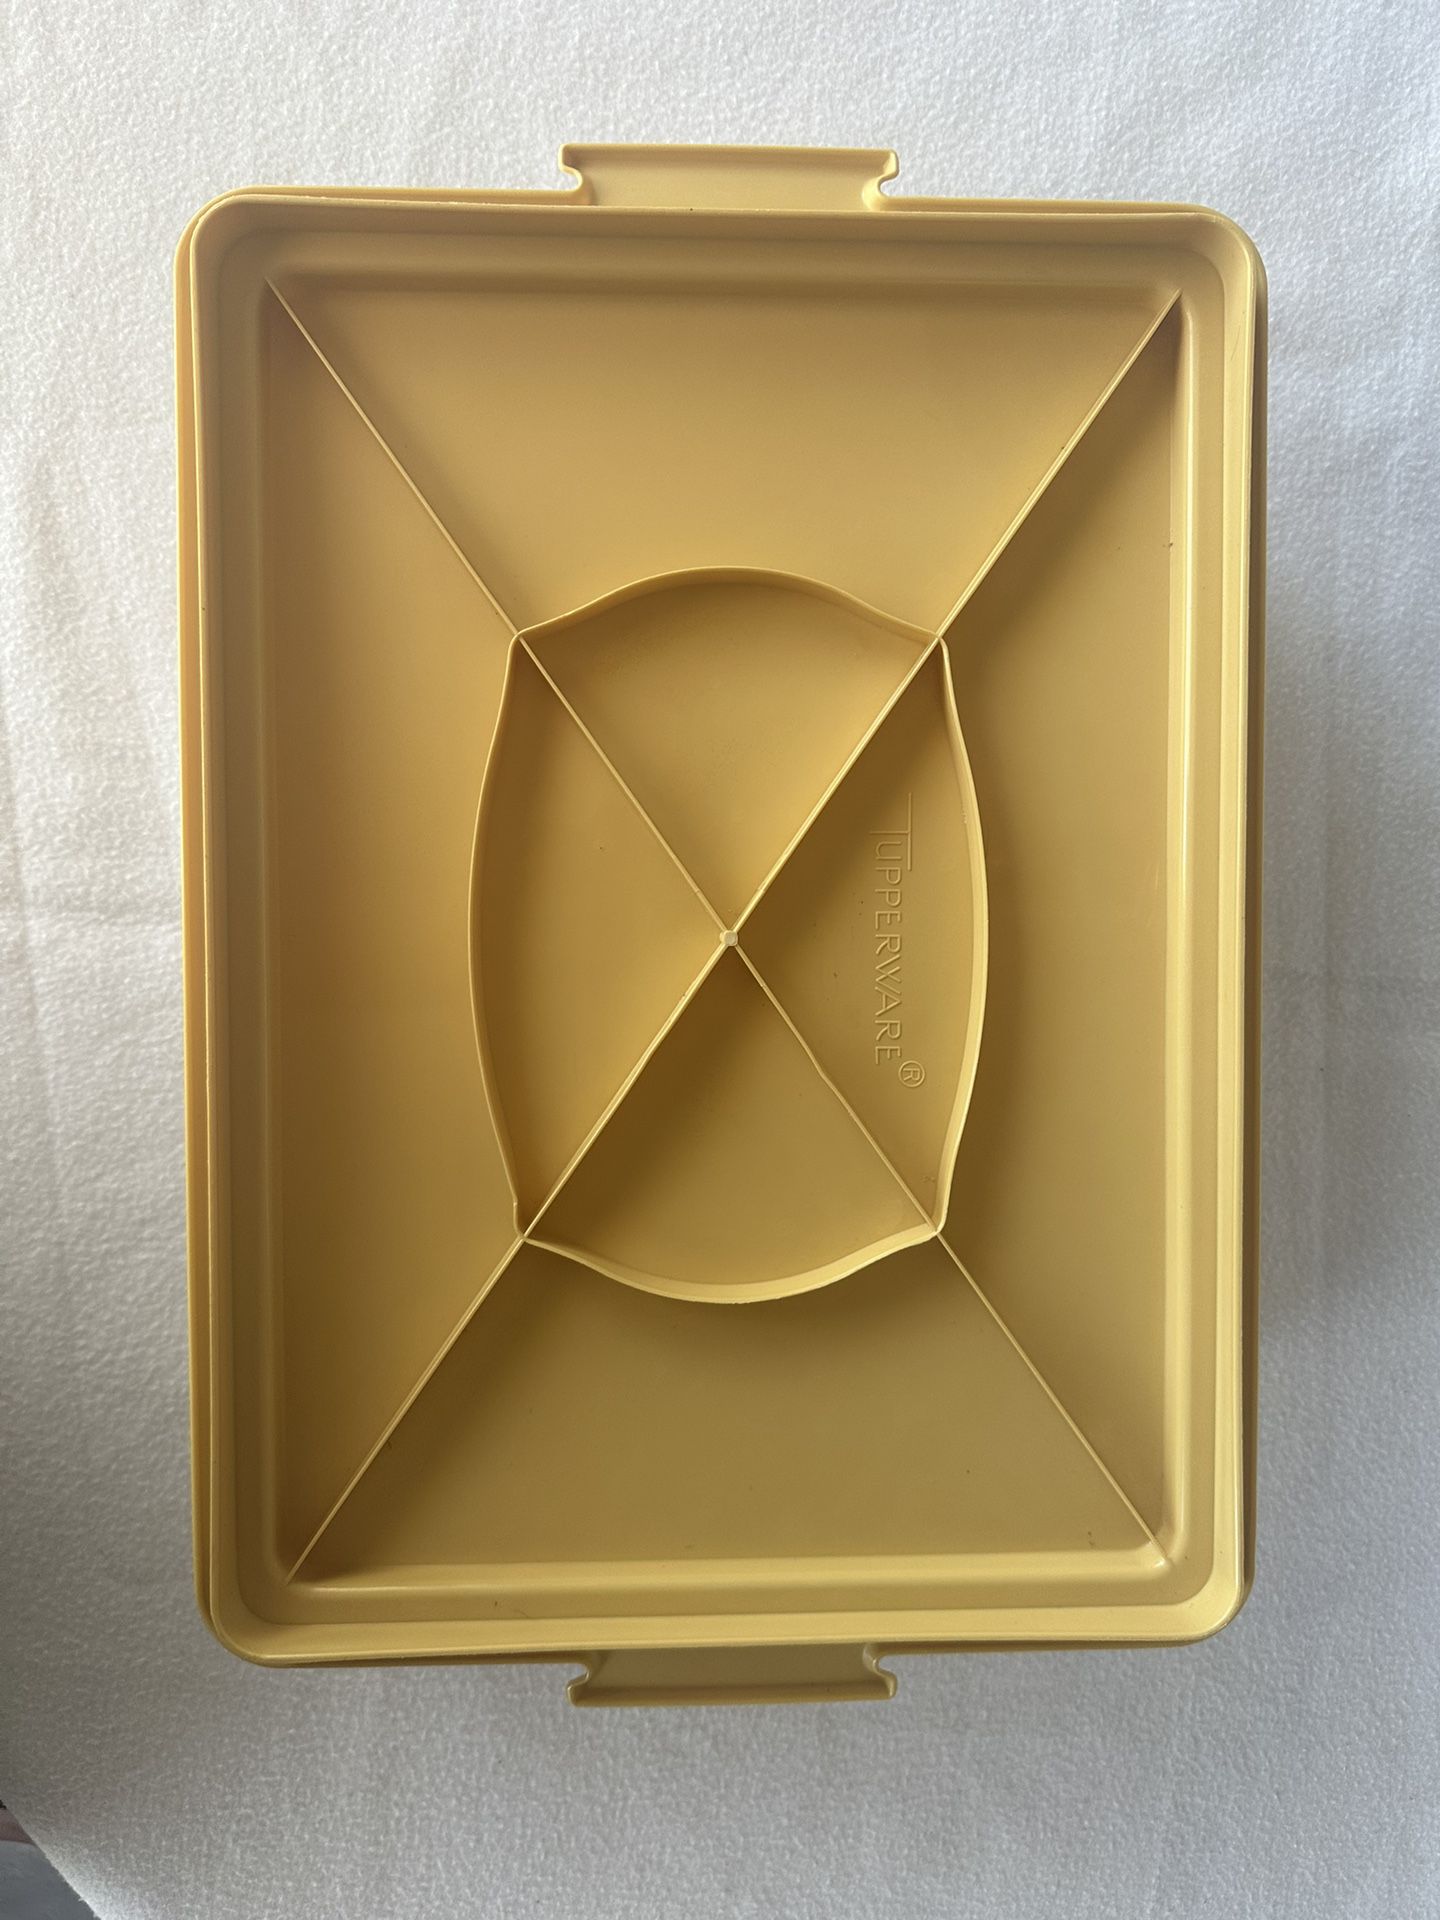 Vintage Tupperware 622-5 Rectangle Cake Taker Carrier Container Harvest  Gold for Sale in Phoenix, AZ - OfferUp